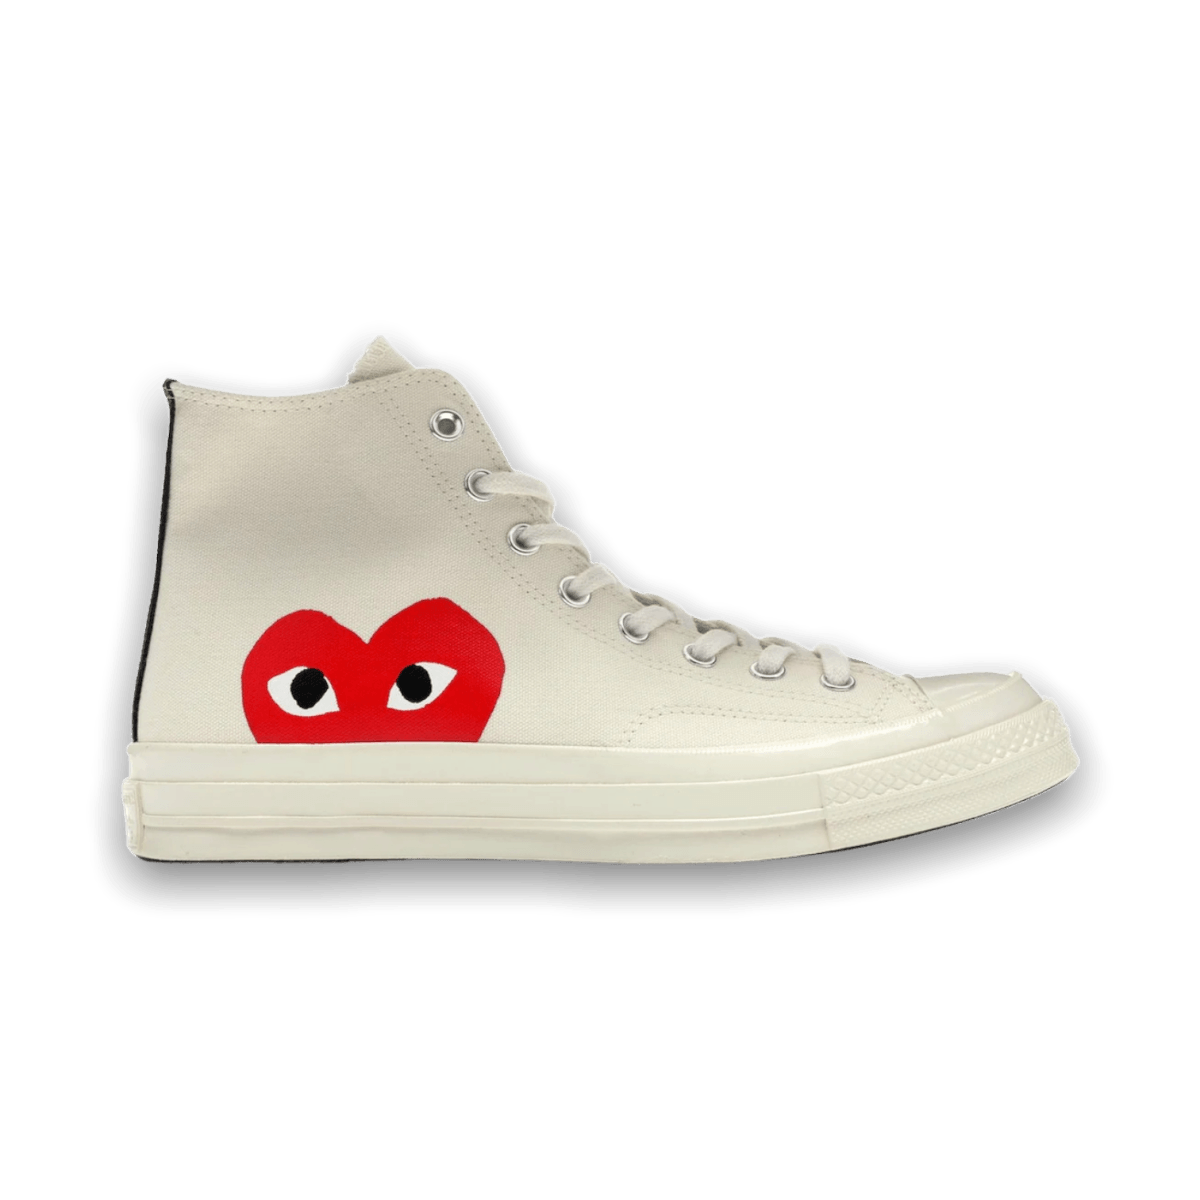 Converse Chuck Taylor All-Star 70 Hi Comme des Garcons PLAY White - High Sneaker - Jawns on Fire Sneakers & Streetwear